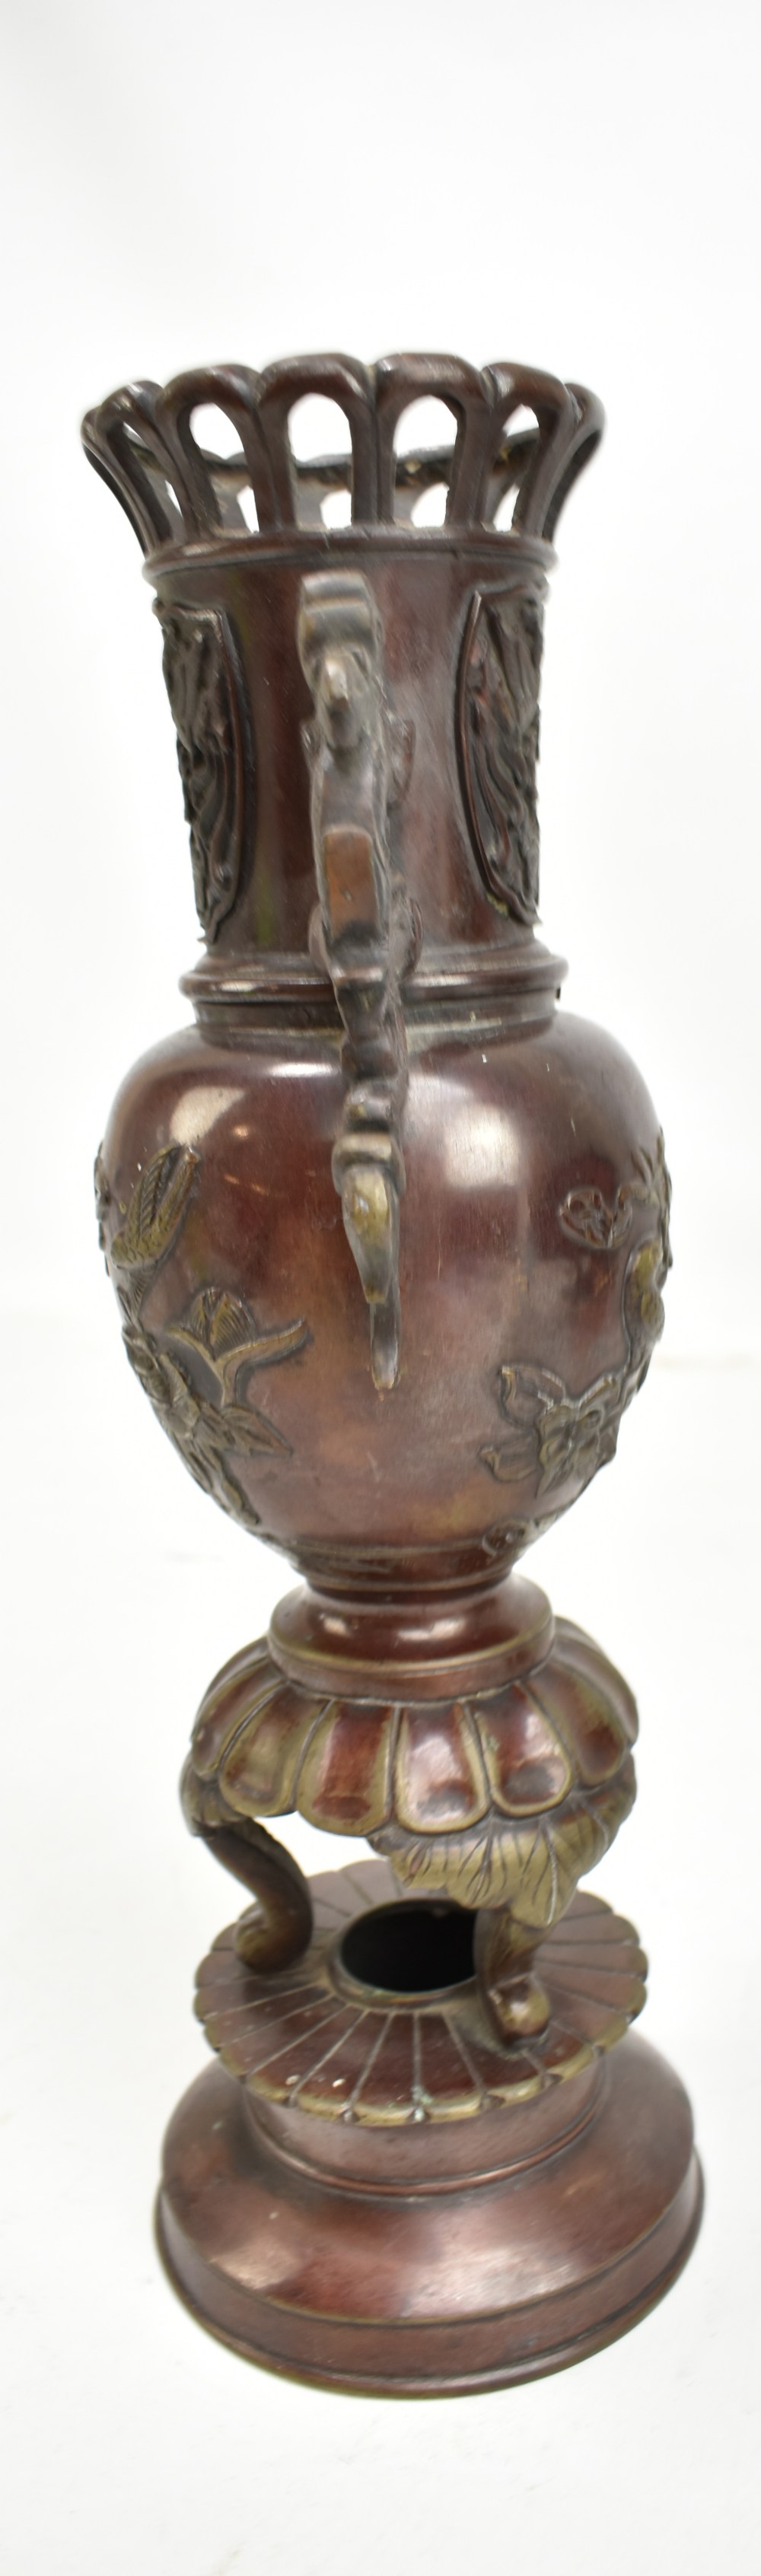 A pair of late 19th/early 20th century Japanese patinated bronze vases with cast twin dragon - Image 11 of 13